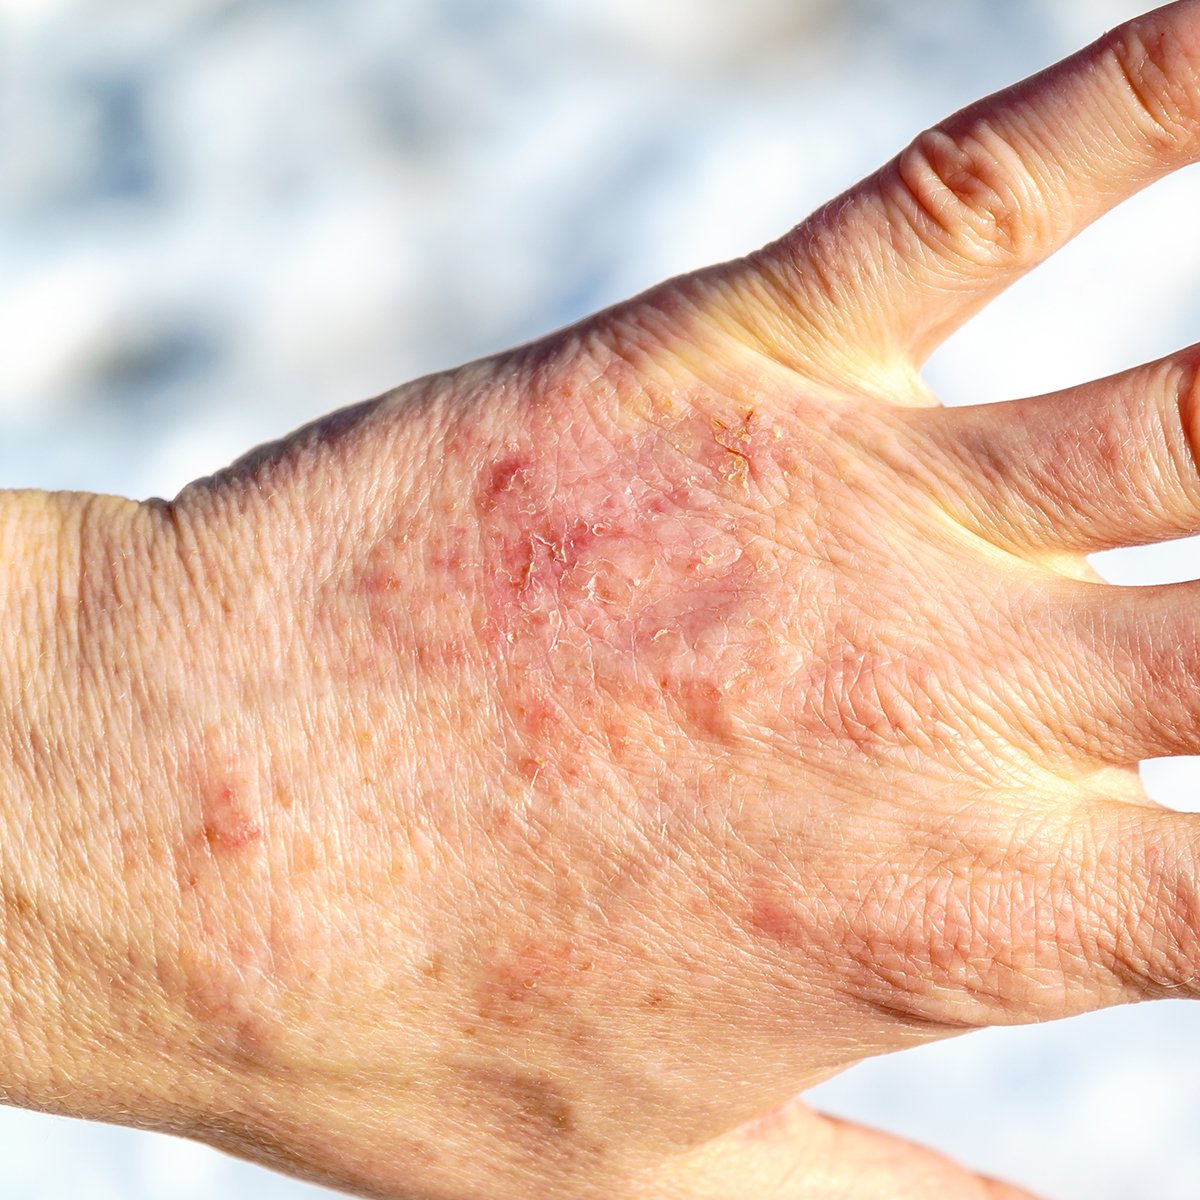 How to avoid dry hands in winter - O'Keeffe's top tips